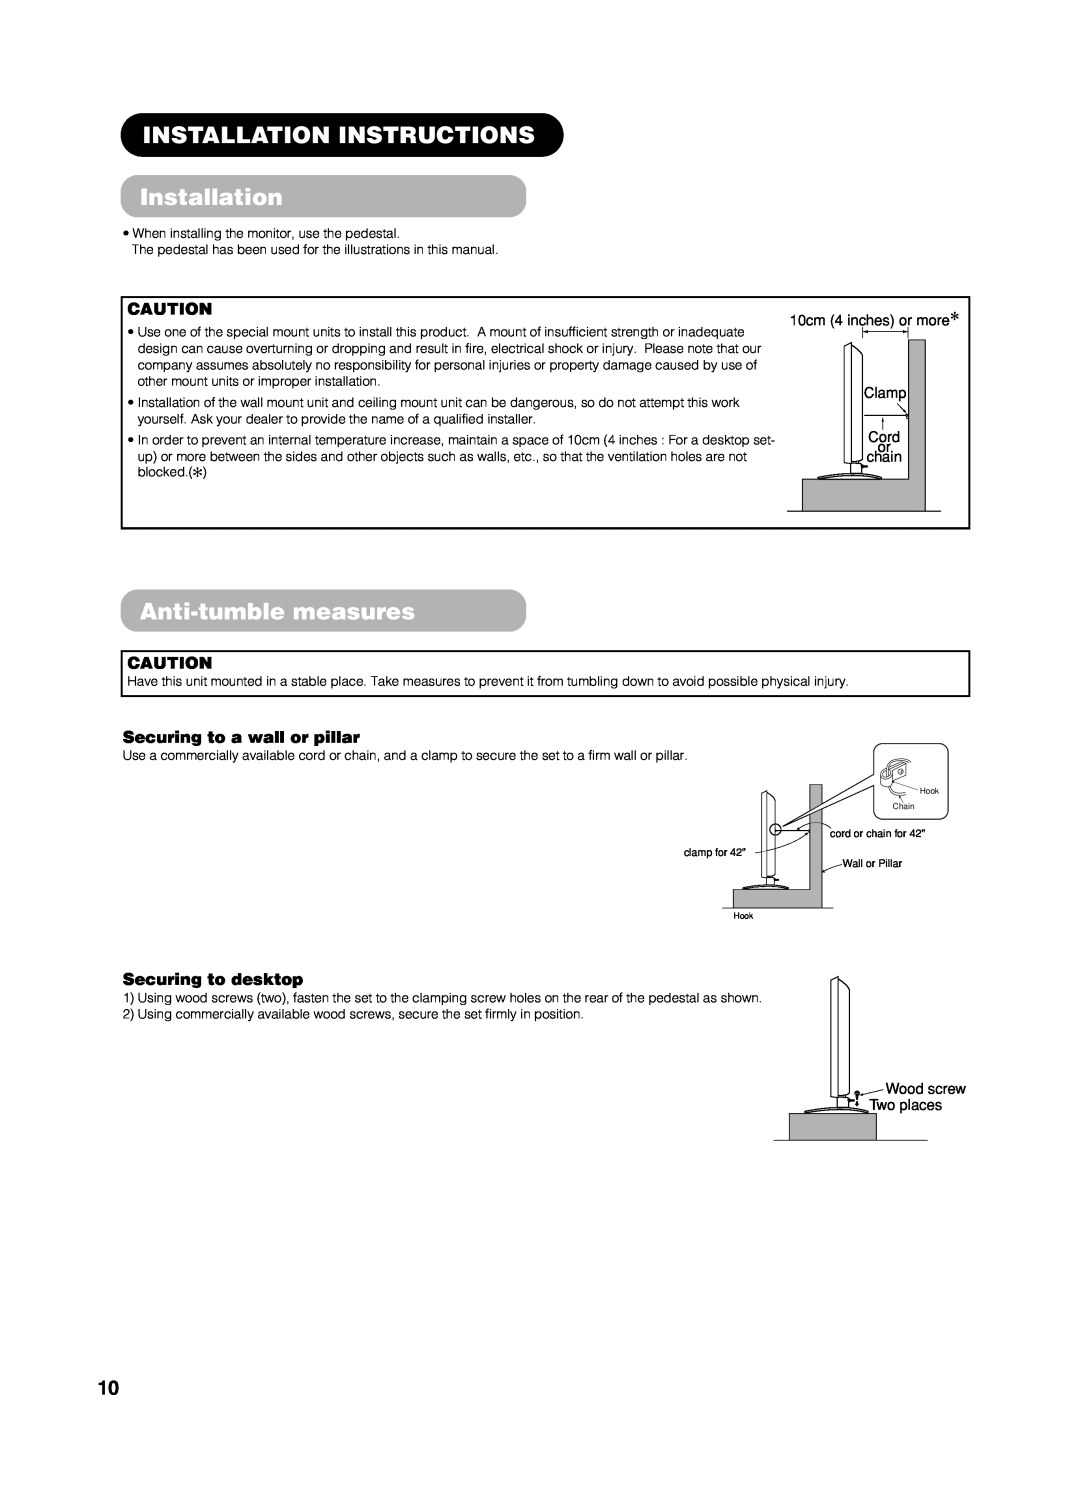 Yamaha PDM-4210E user manual INSTALLATION INSTRUCTIONS Installation, Anti-tumble measures, Securing to a wall or pillar 